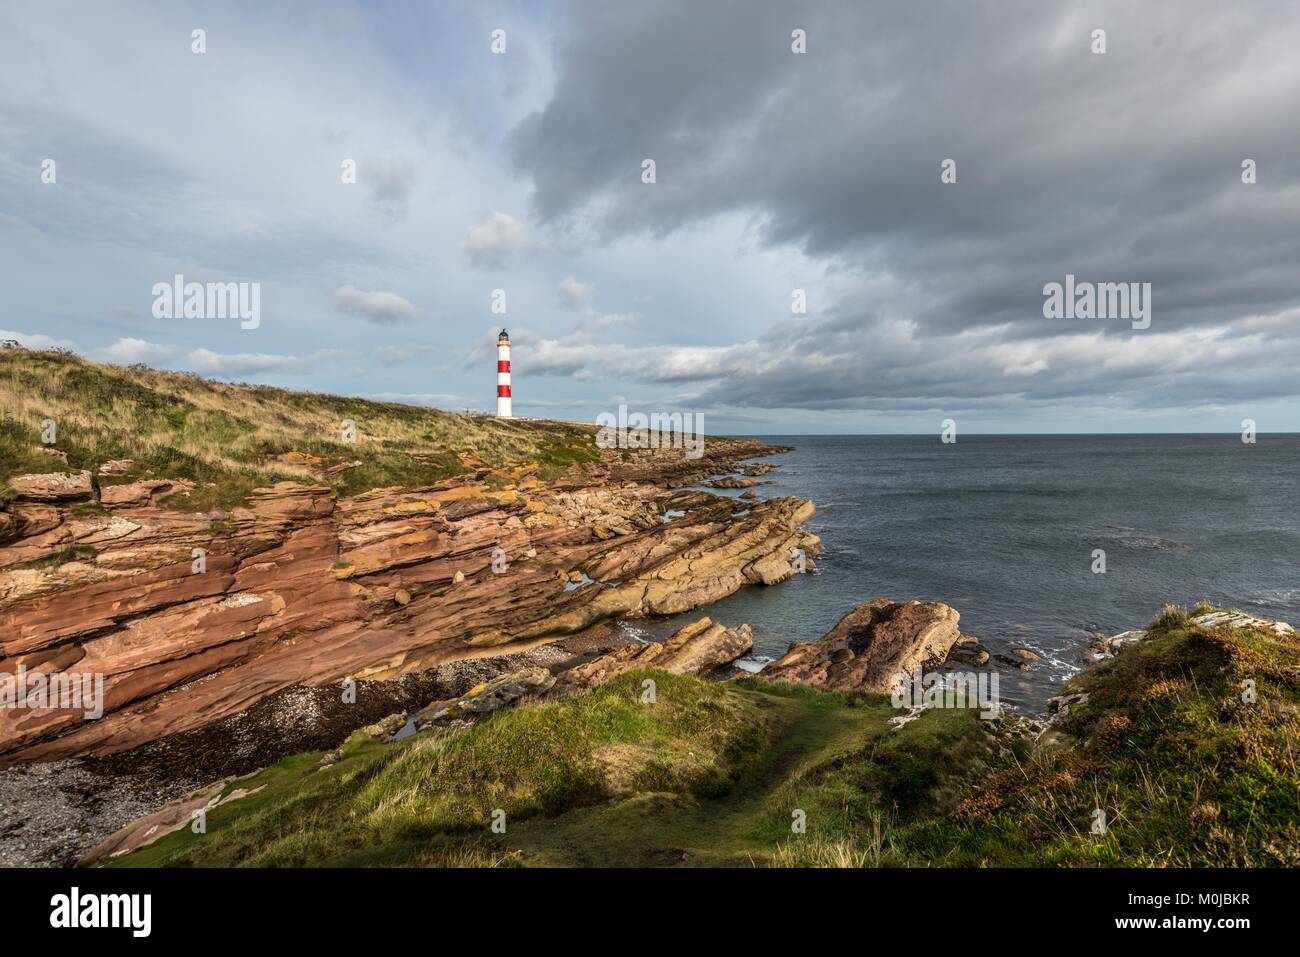 The Tarbat Ness Lighthouse is located at the North West tip of the Tarbat Ness peninsula near the fishing village of Portmahomack in Scotland. Stock Photo